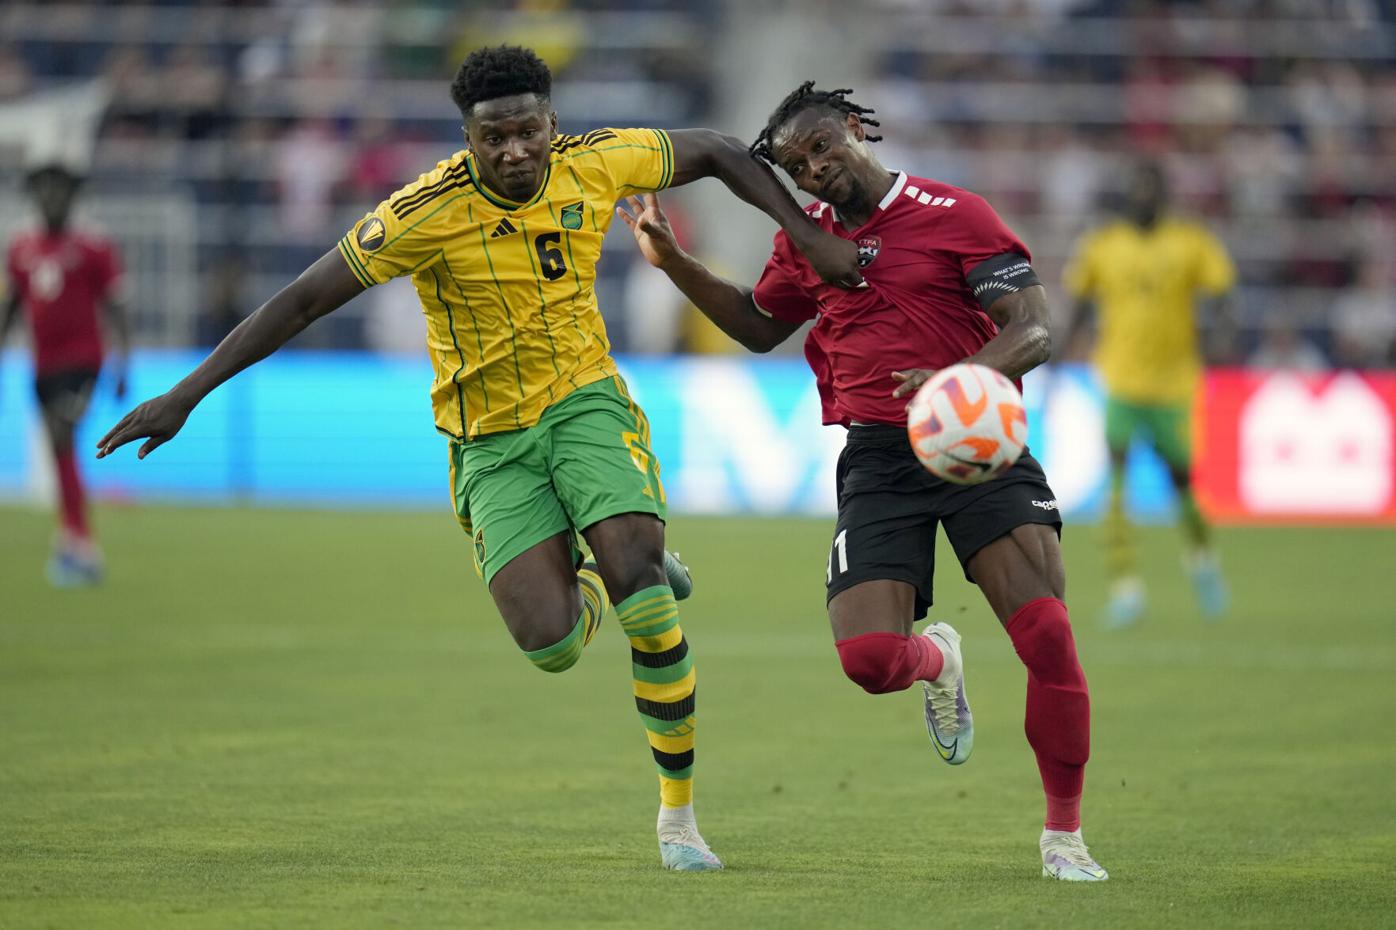 Angus Eve defends changes after Jamaica ends T&T’s 10 game unbeaten run